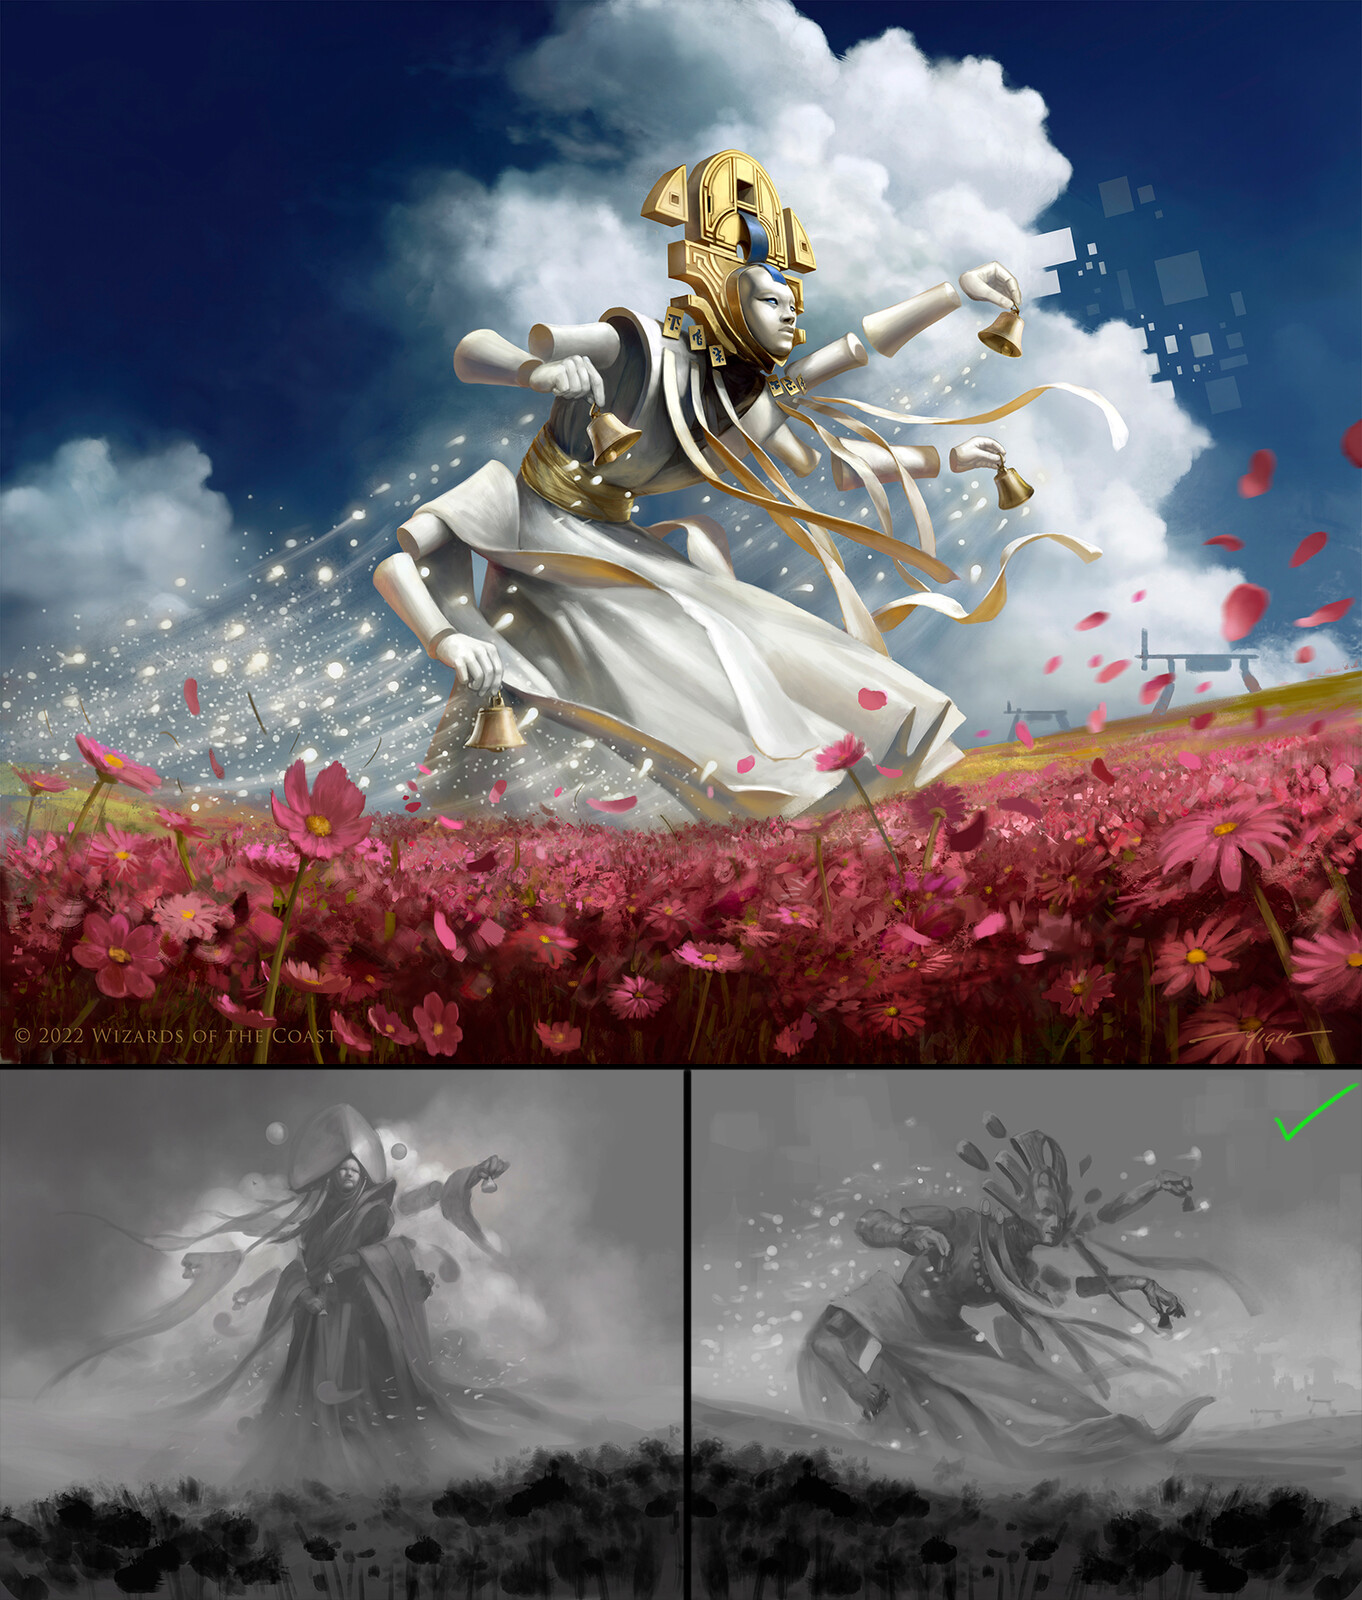 Myojin of Blooming Dawn, for Magic the Gathering's "Kamigawa: Neon Dynasty" set. 2022. 
The brief for this assignment had minimal visual guidance, so i was free to design this character.